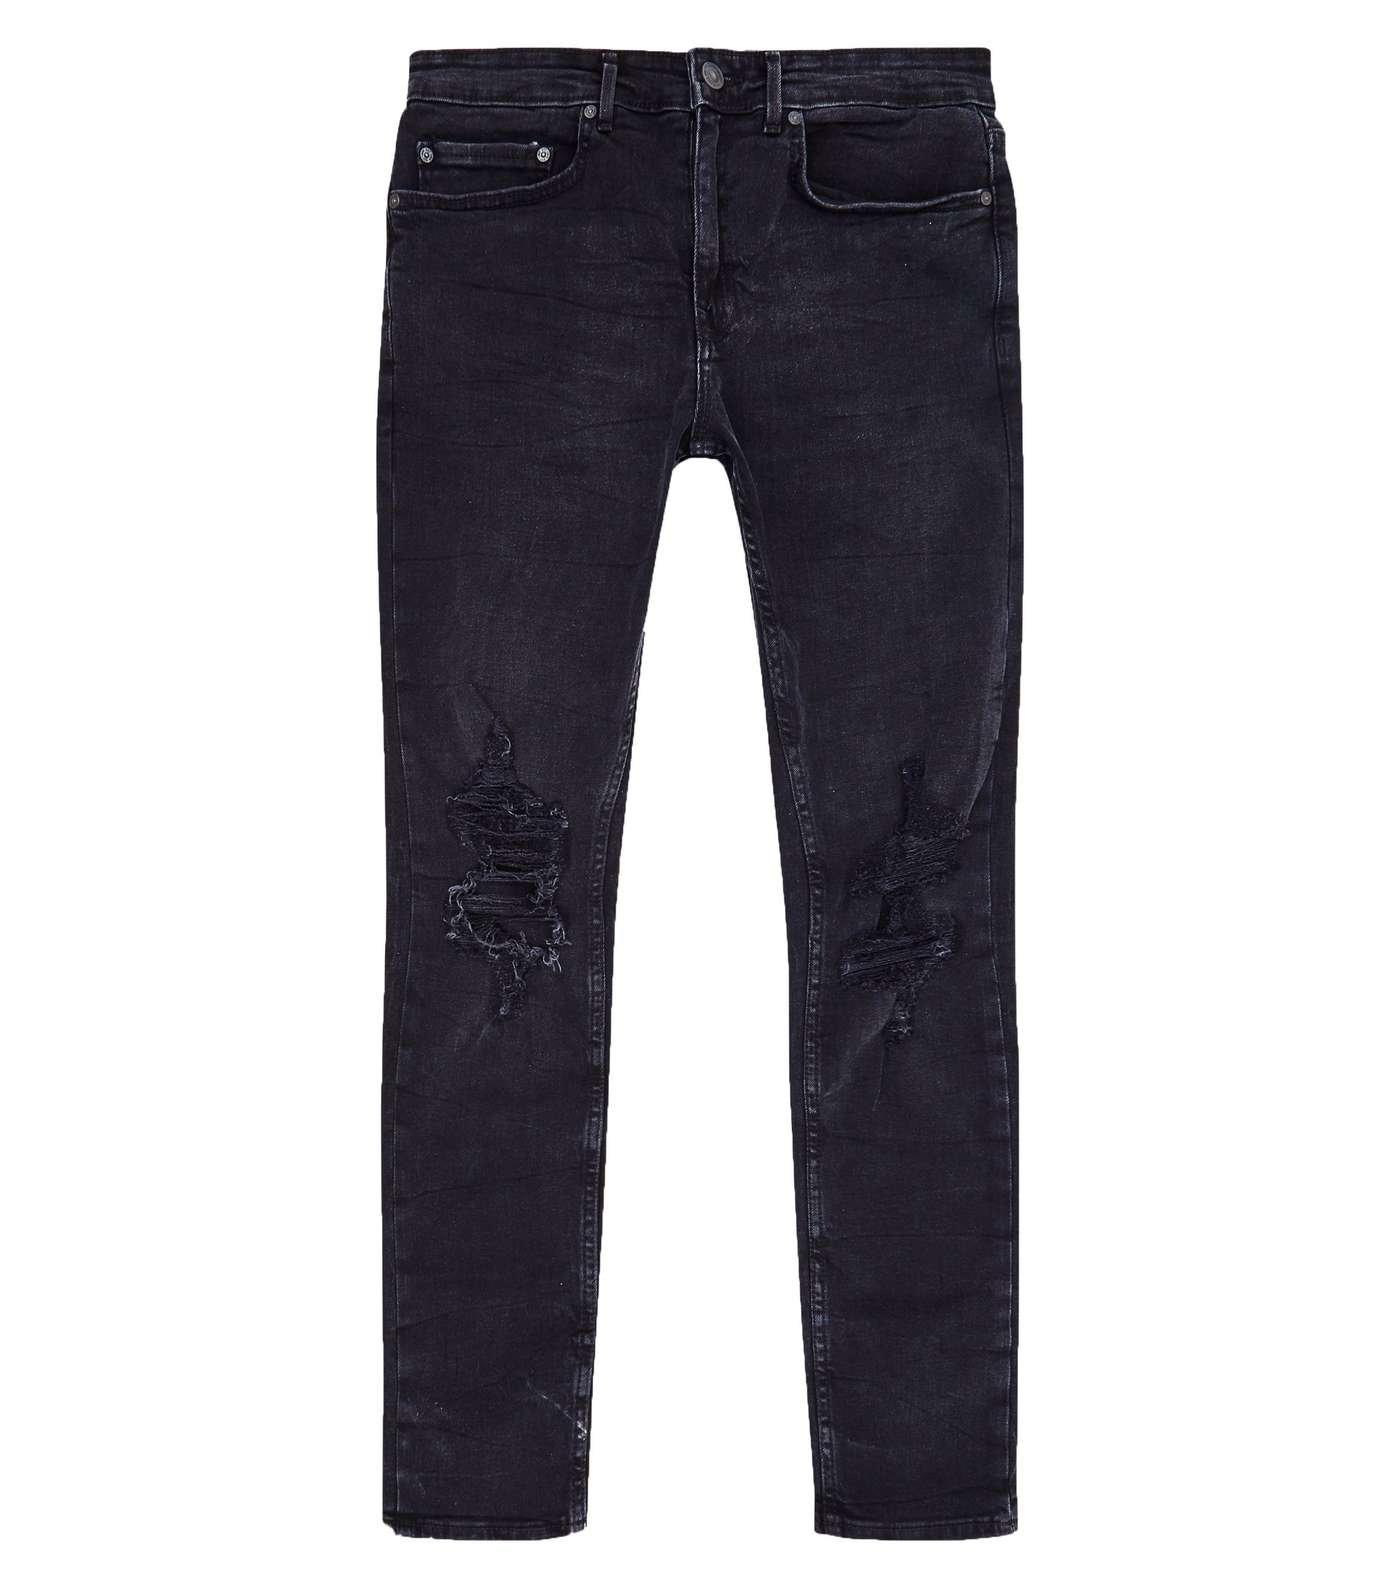 Black Washed Ripped Skinny Stretch Jeans Image 4